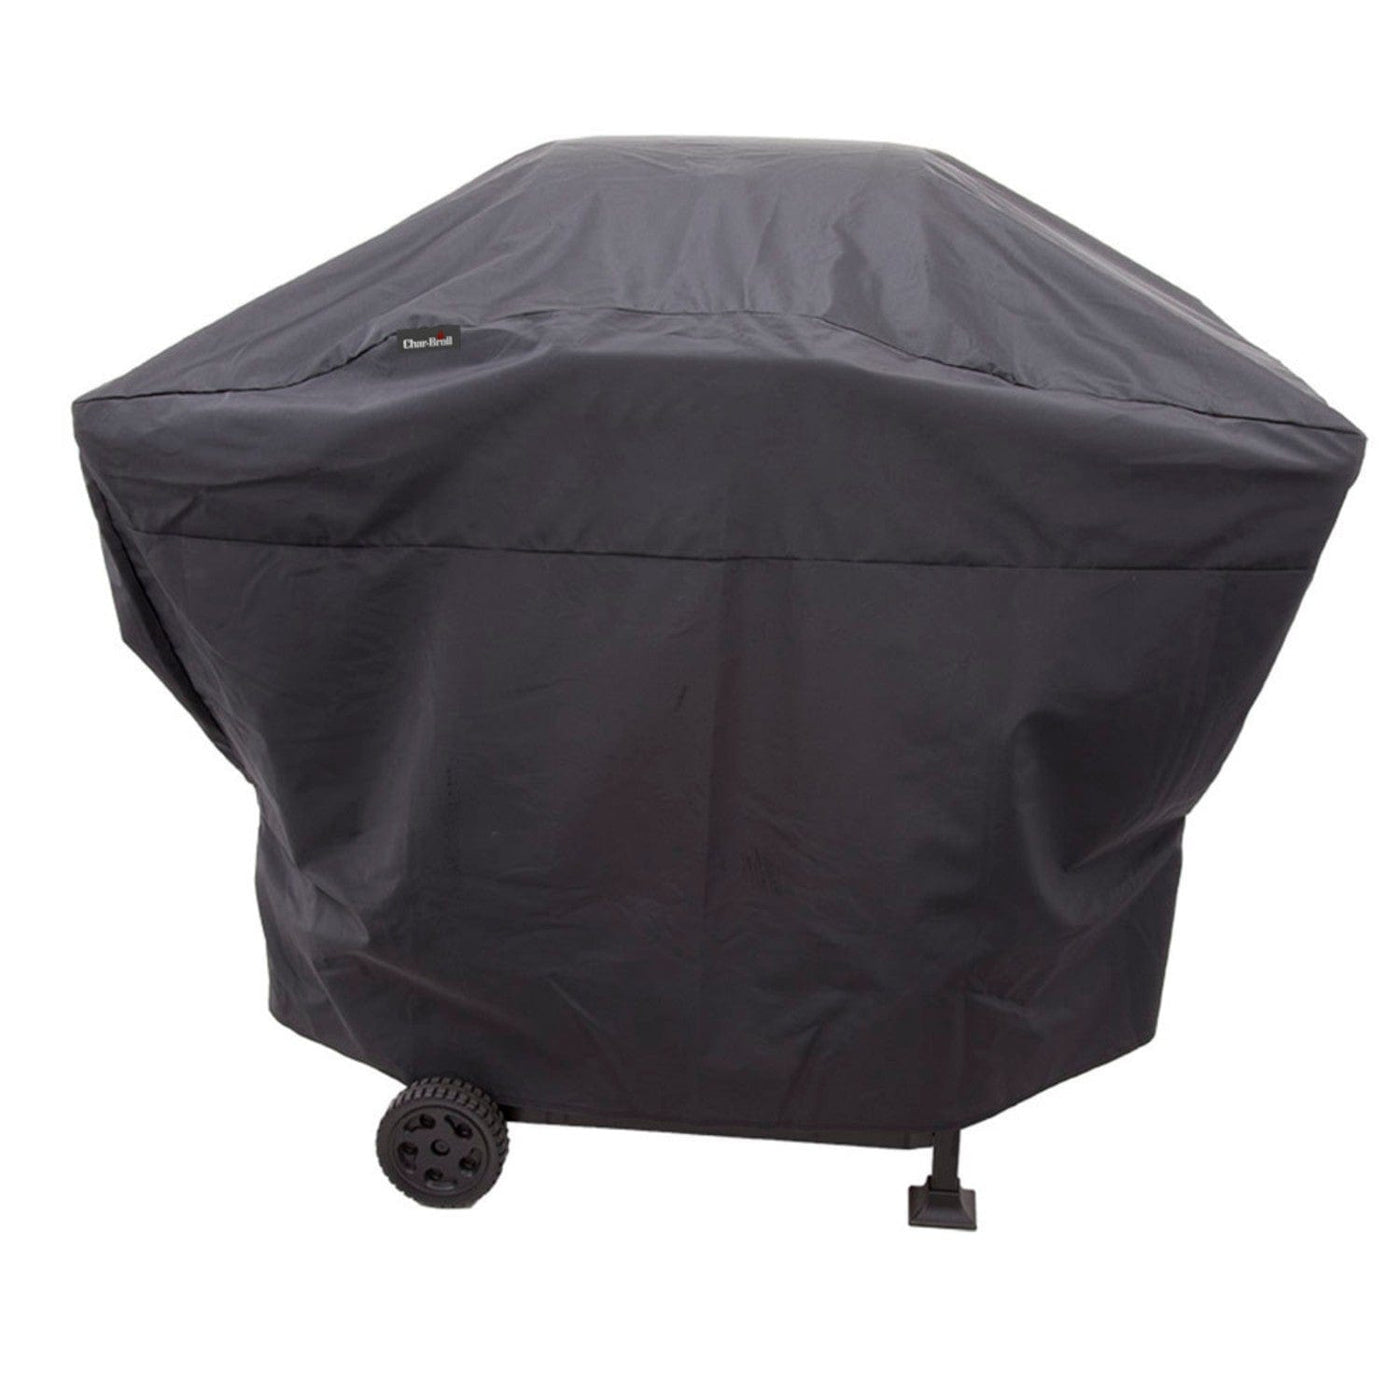 Char-Broil Char-Broil Medium 2 Burner Performance Grill Cover Medium Camping And Outdoor